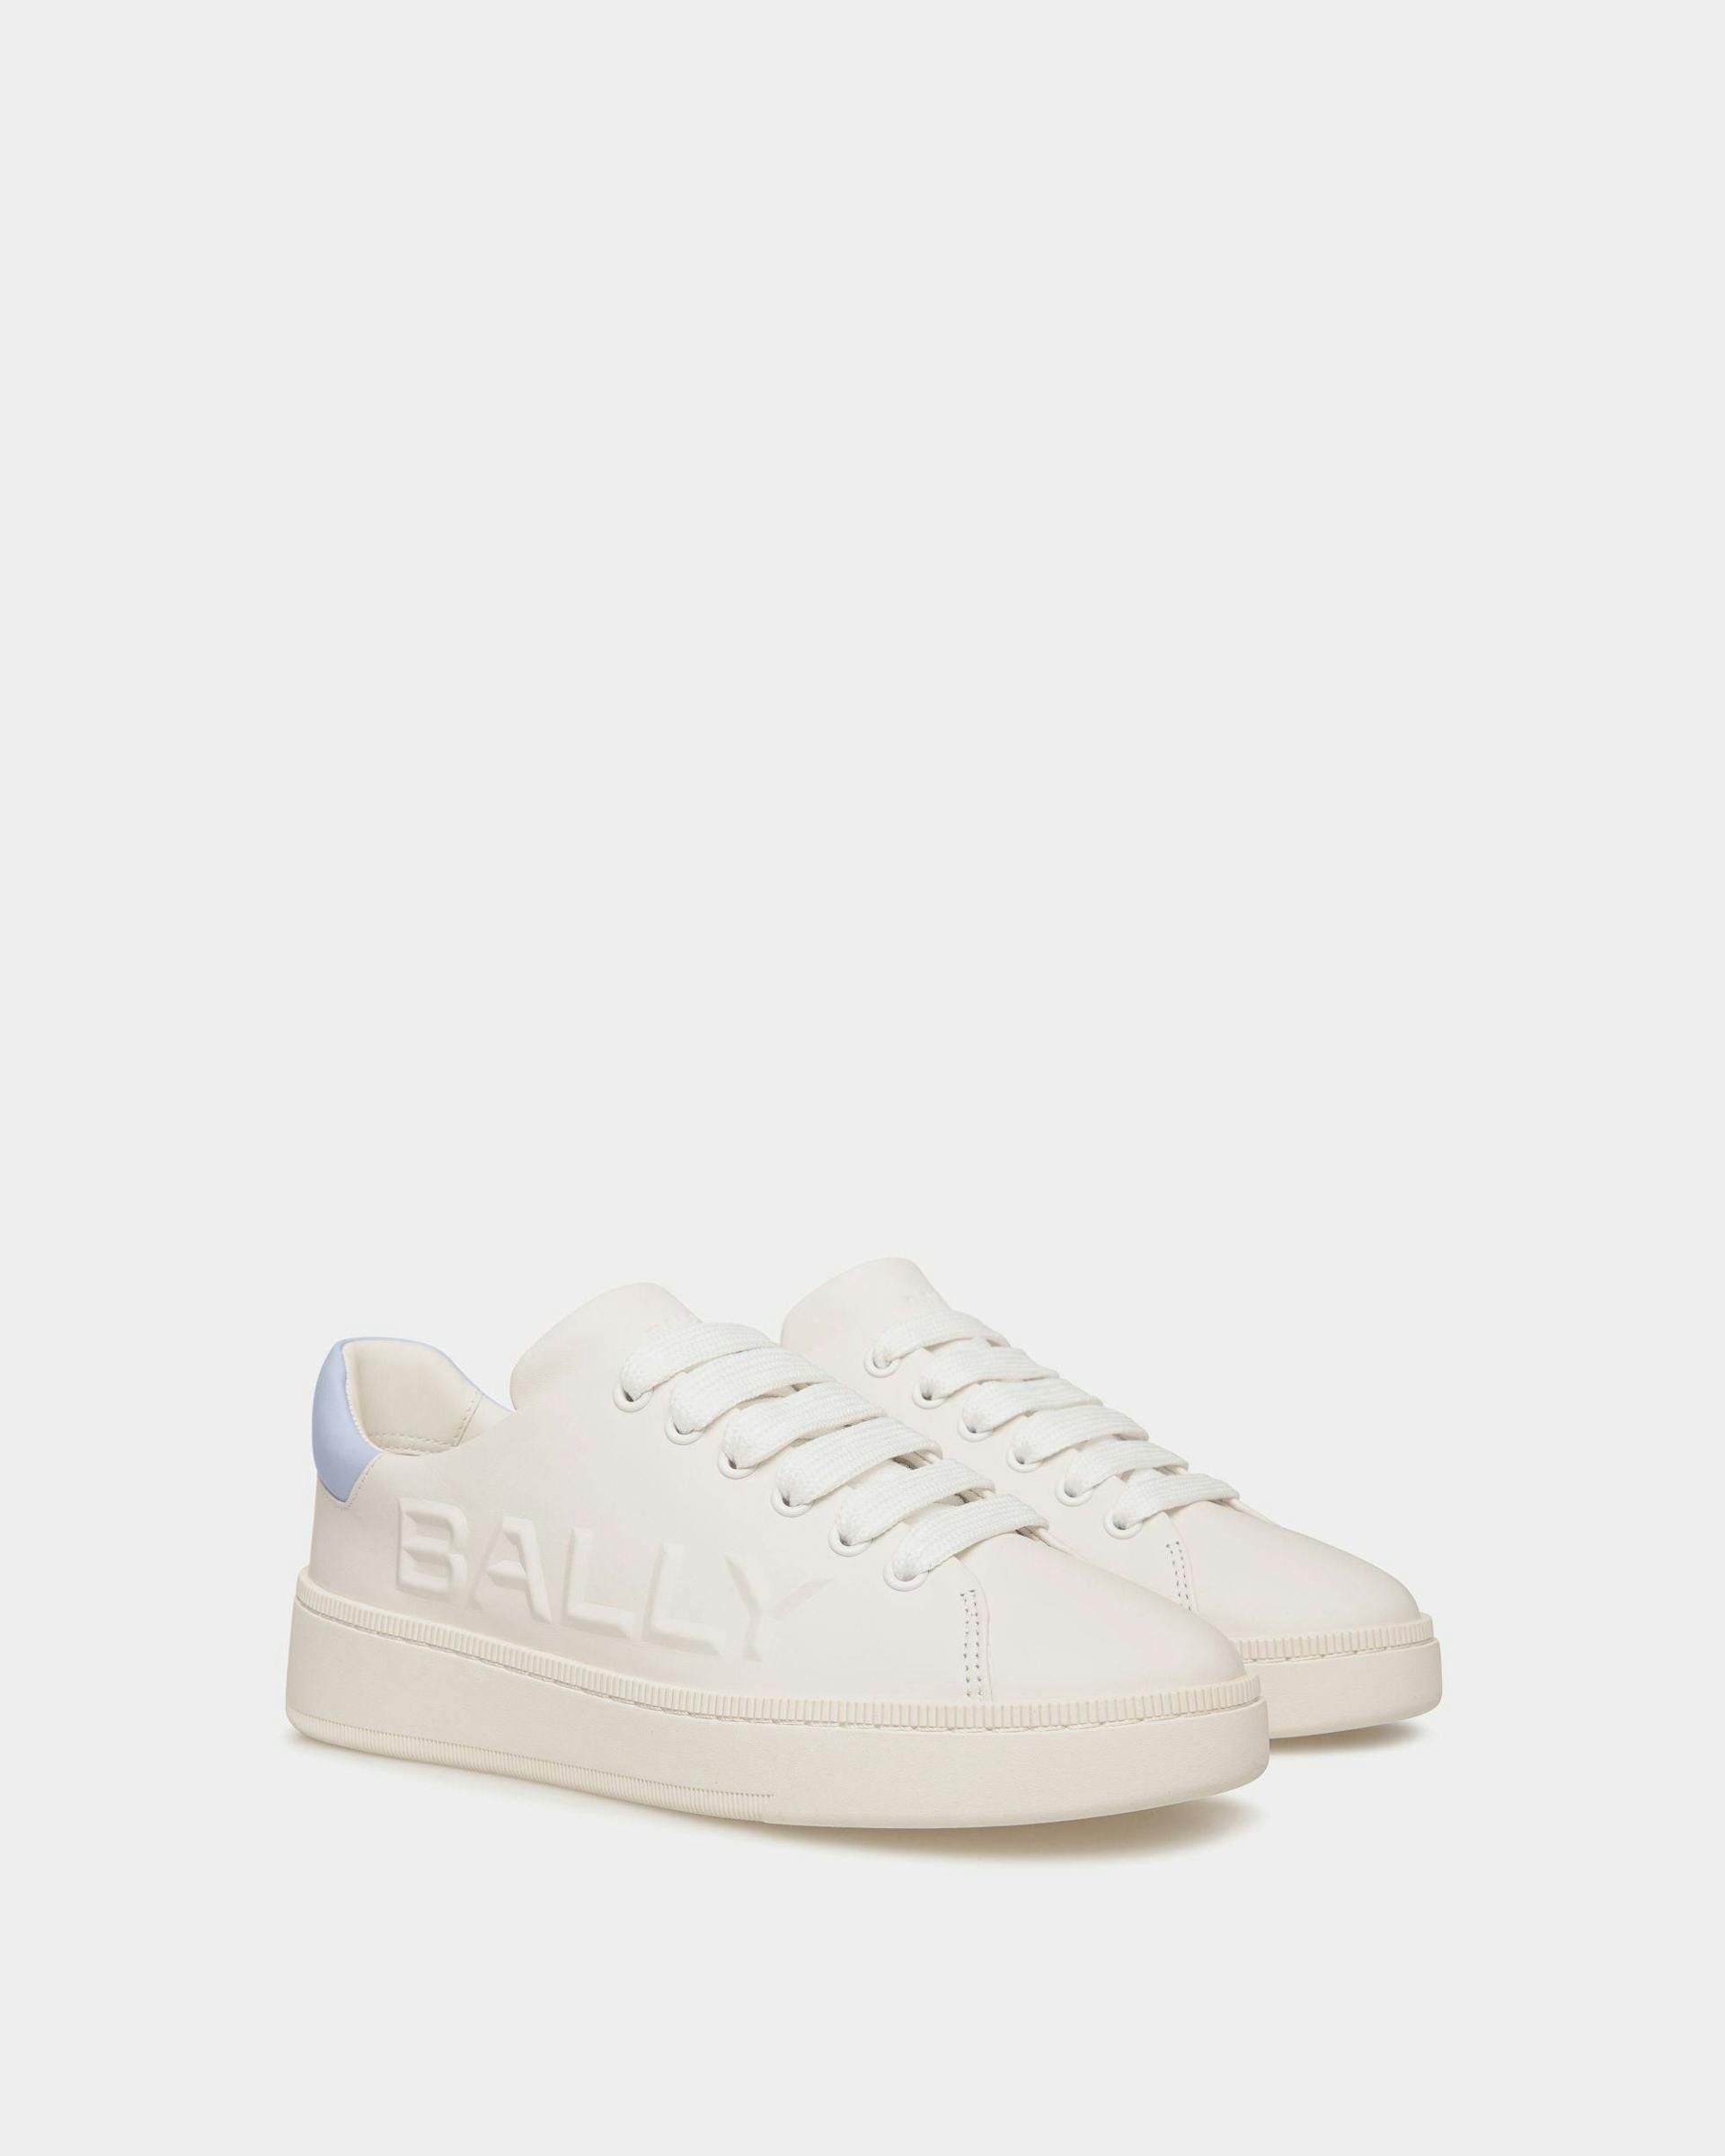 Women's Raise Sneaker in White And Light Blue Leather | Bally | Still Life 3/4 Front